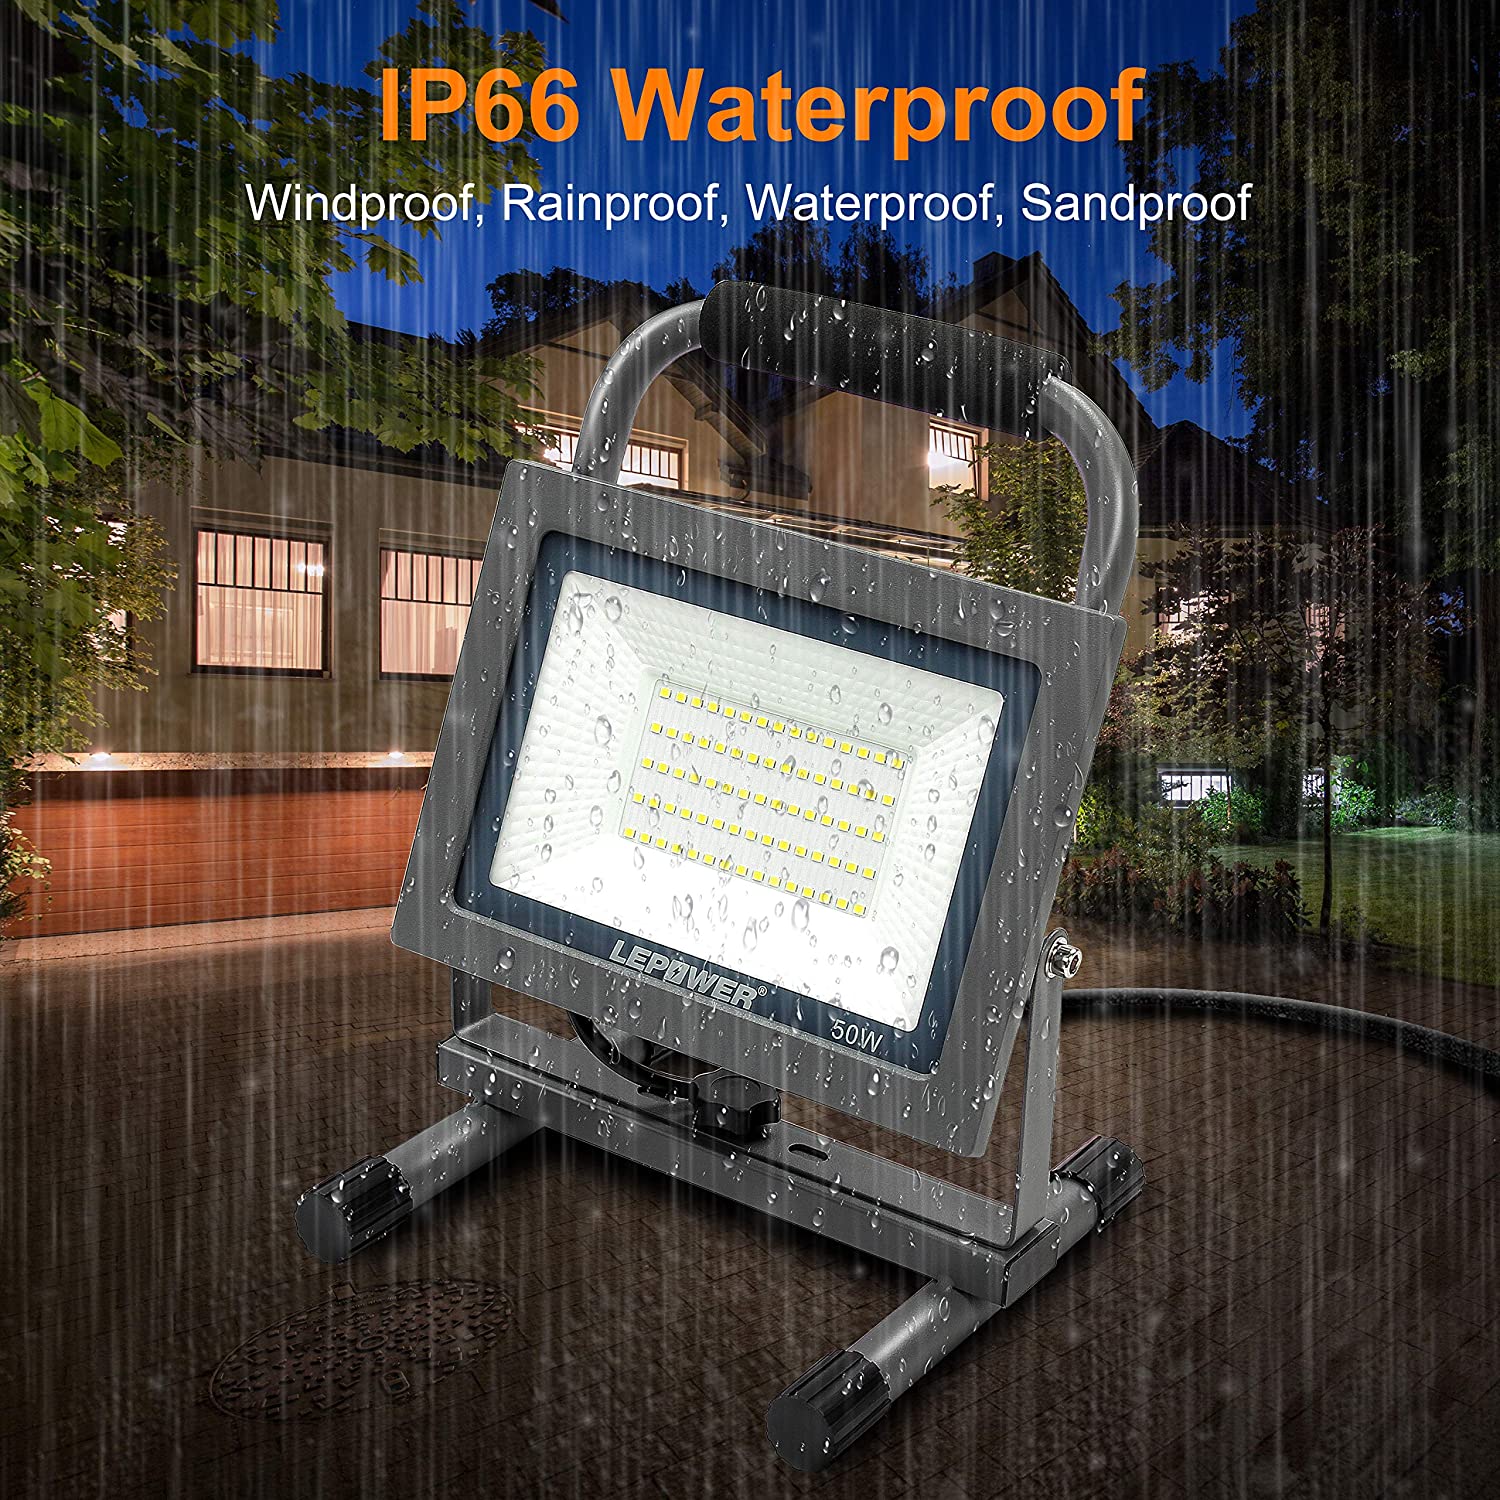 50W Portable LED Work Light with Stand & Plug